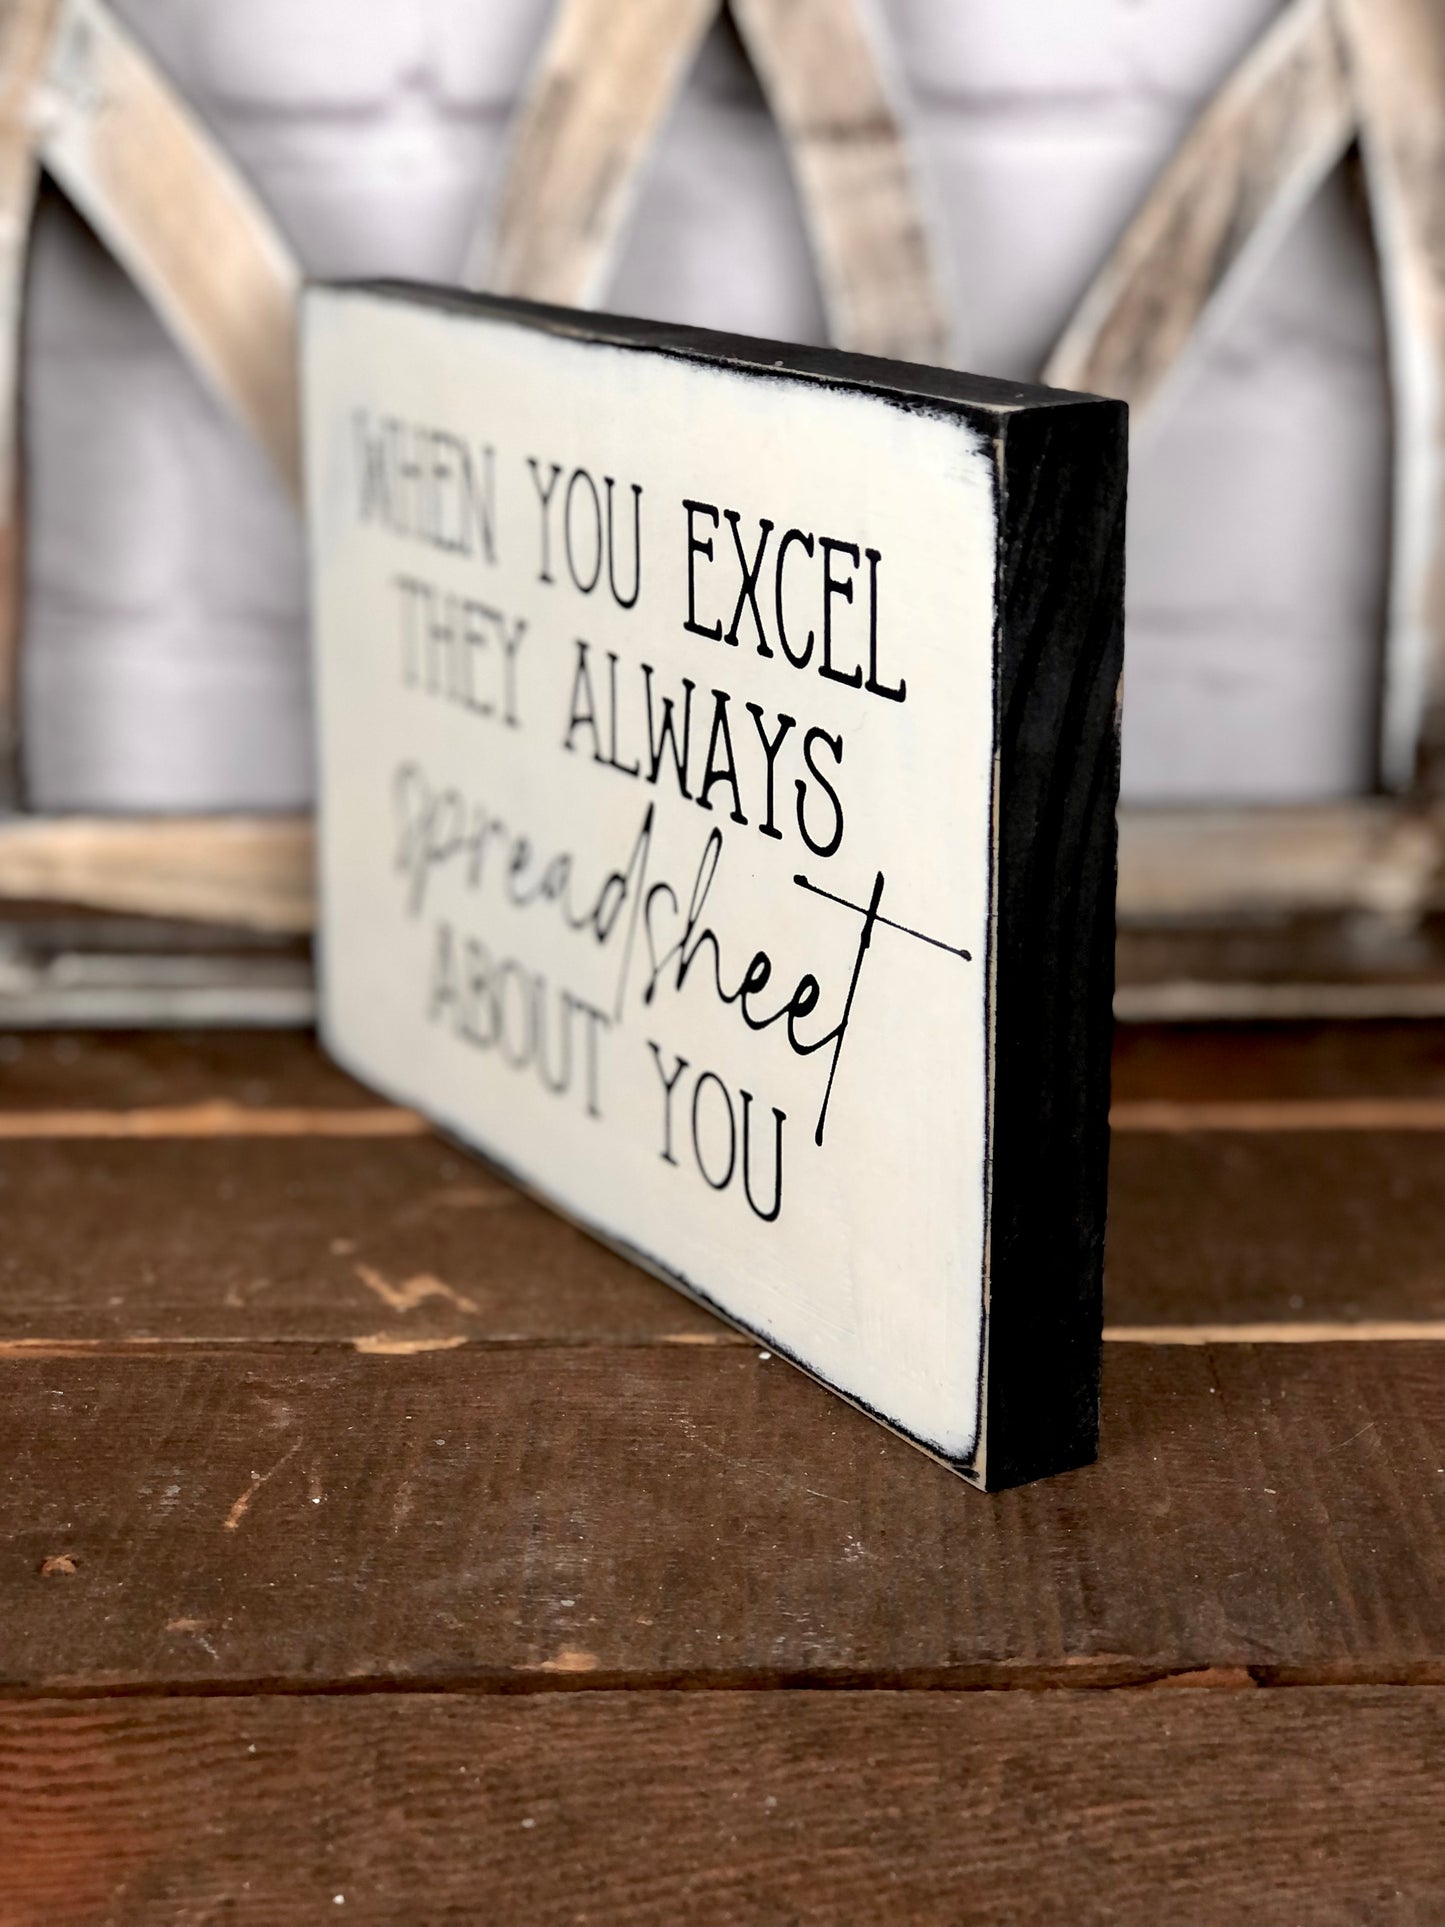 WHEN YOU EXCEL THEY ALWAYS SPREADSHEET ABOUT YOU- WOOD SIGN